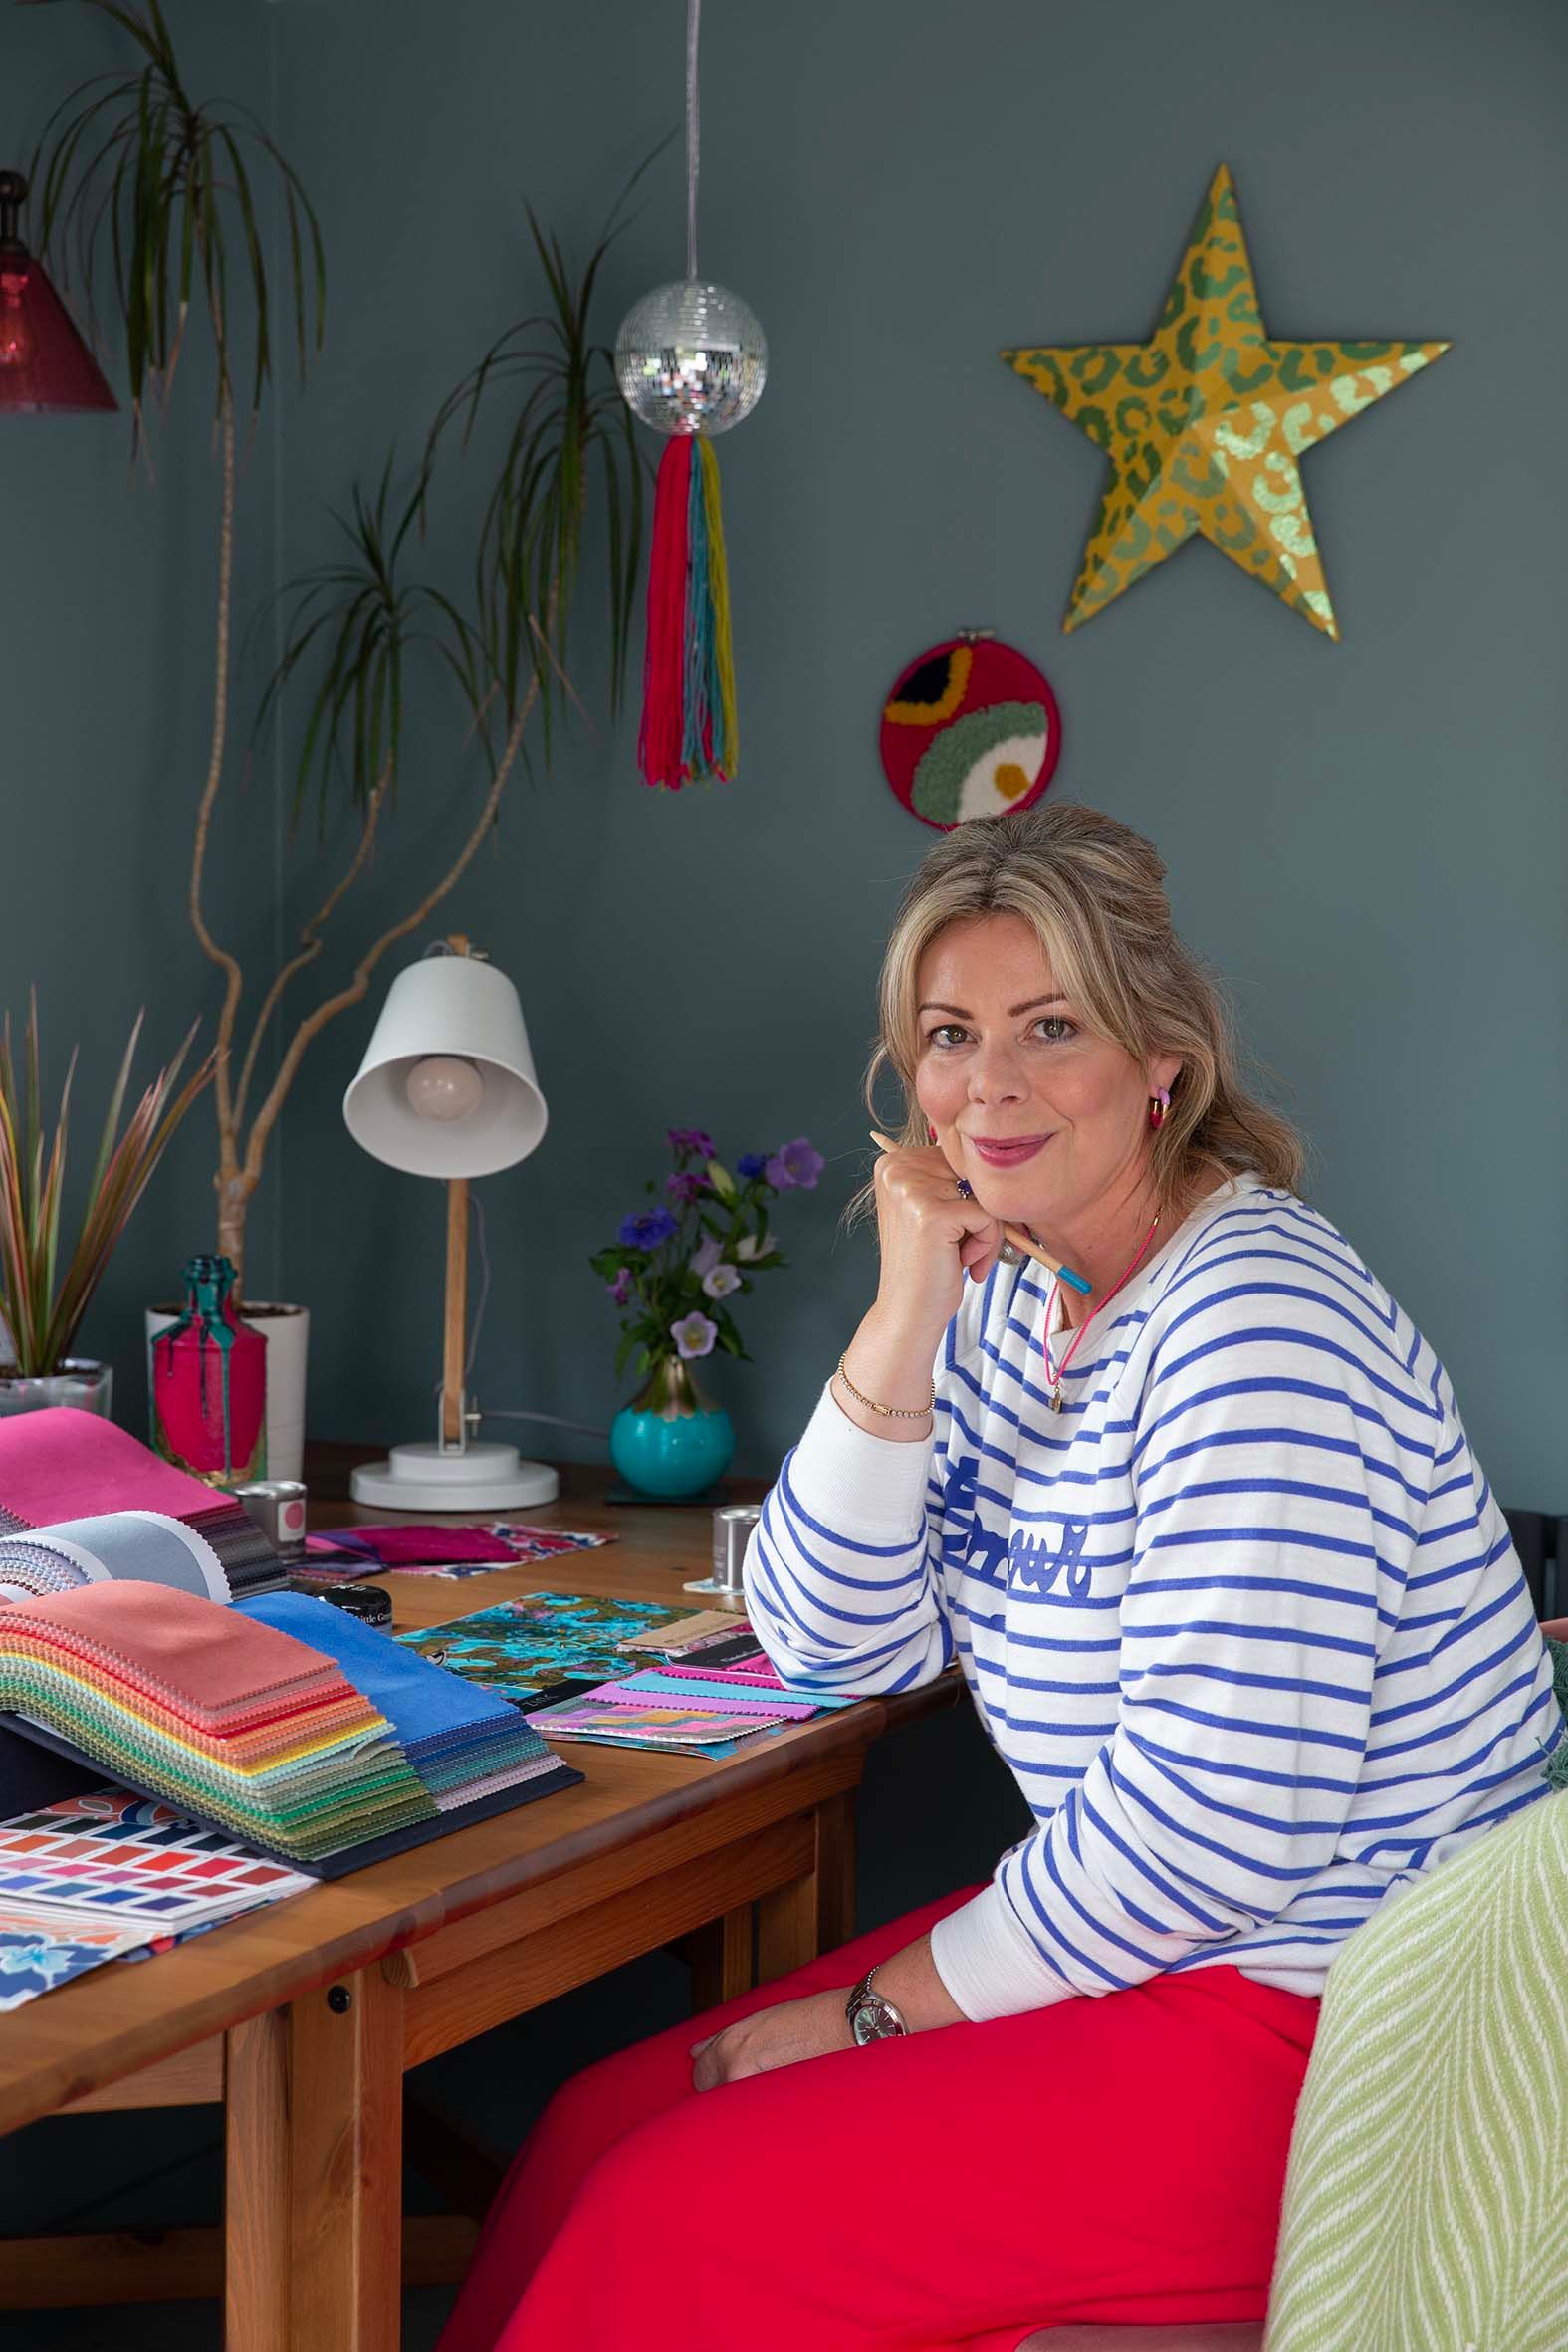 Kay James, founder and lead interior designer at K Interiors. If you’re looking for an expert eye on your next interiors project, book a complimentary discovery call today.